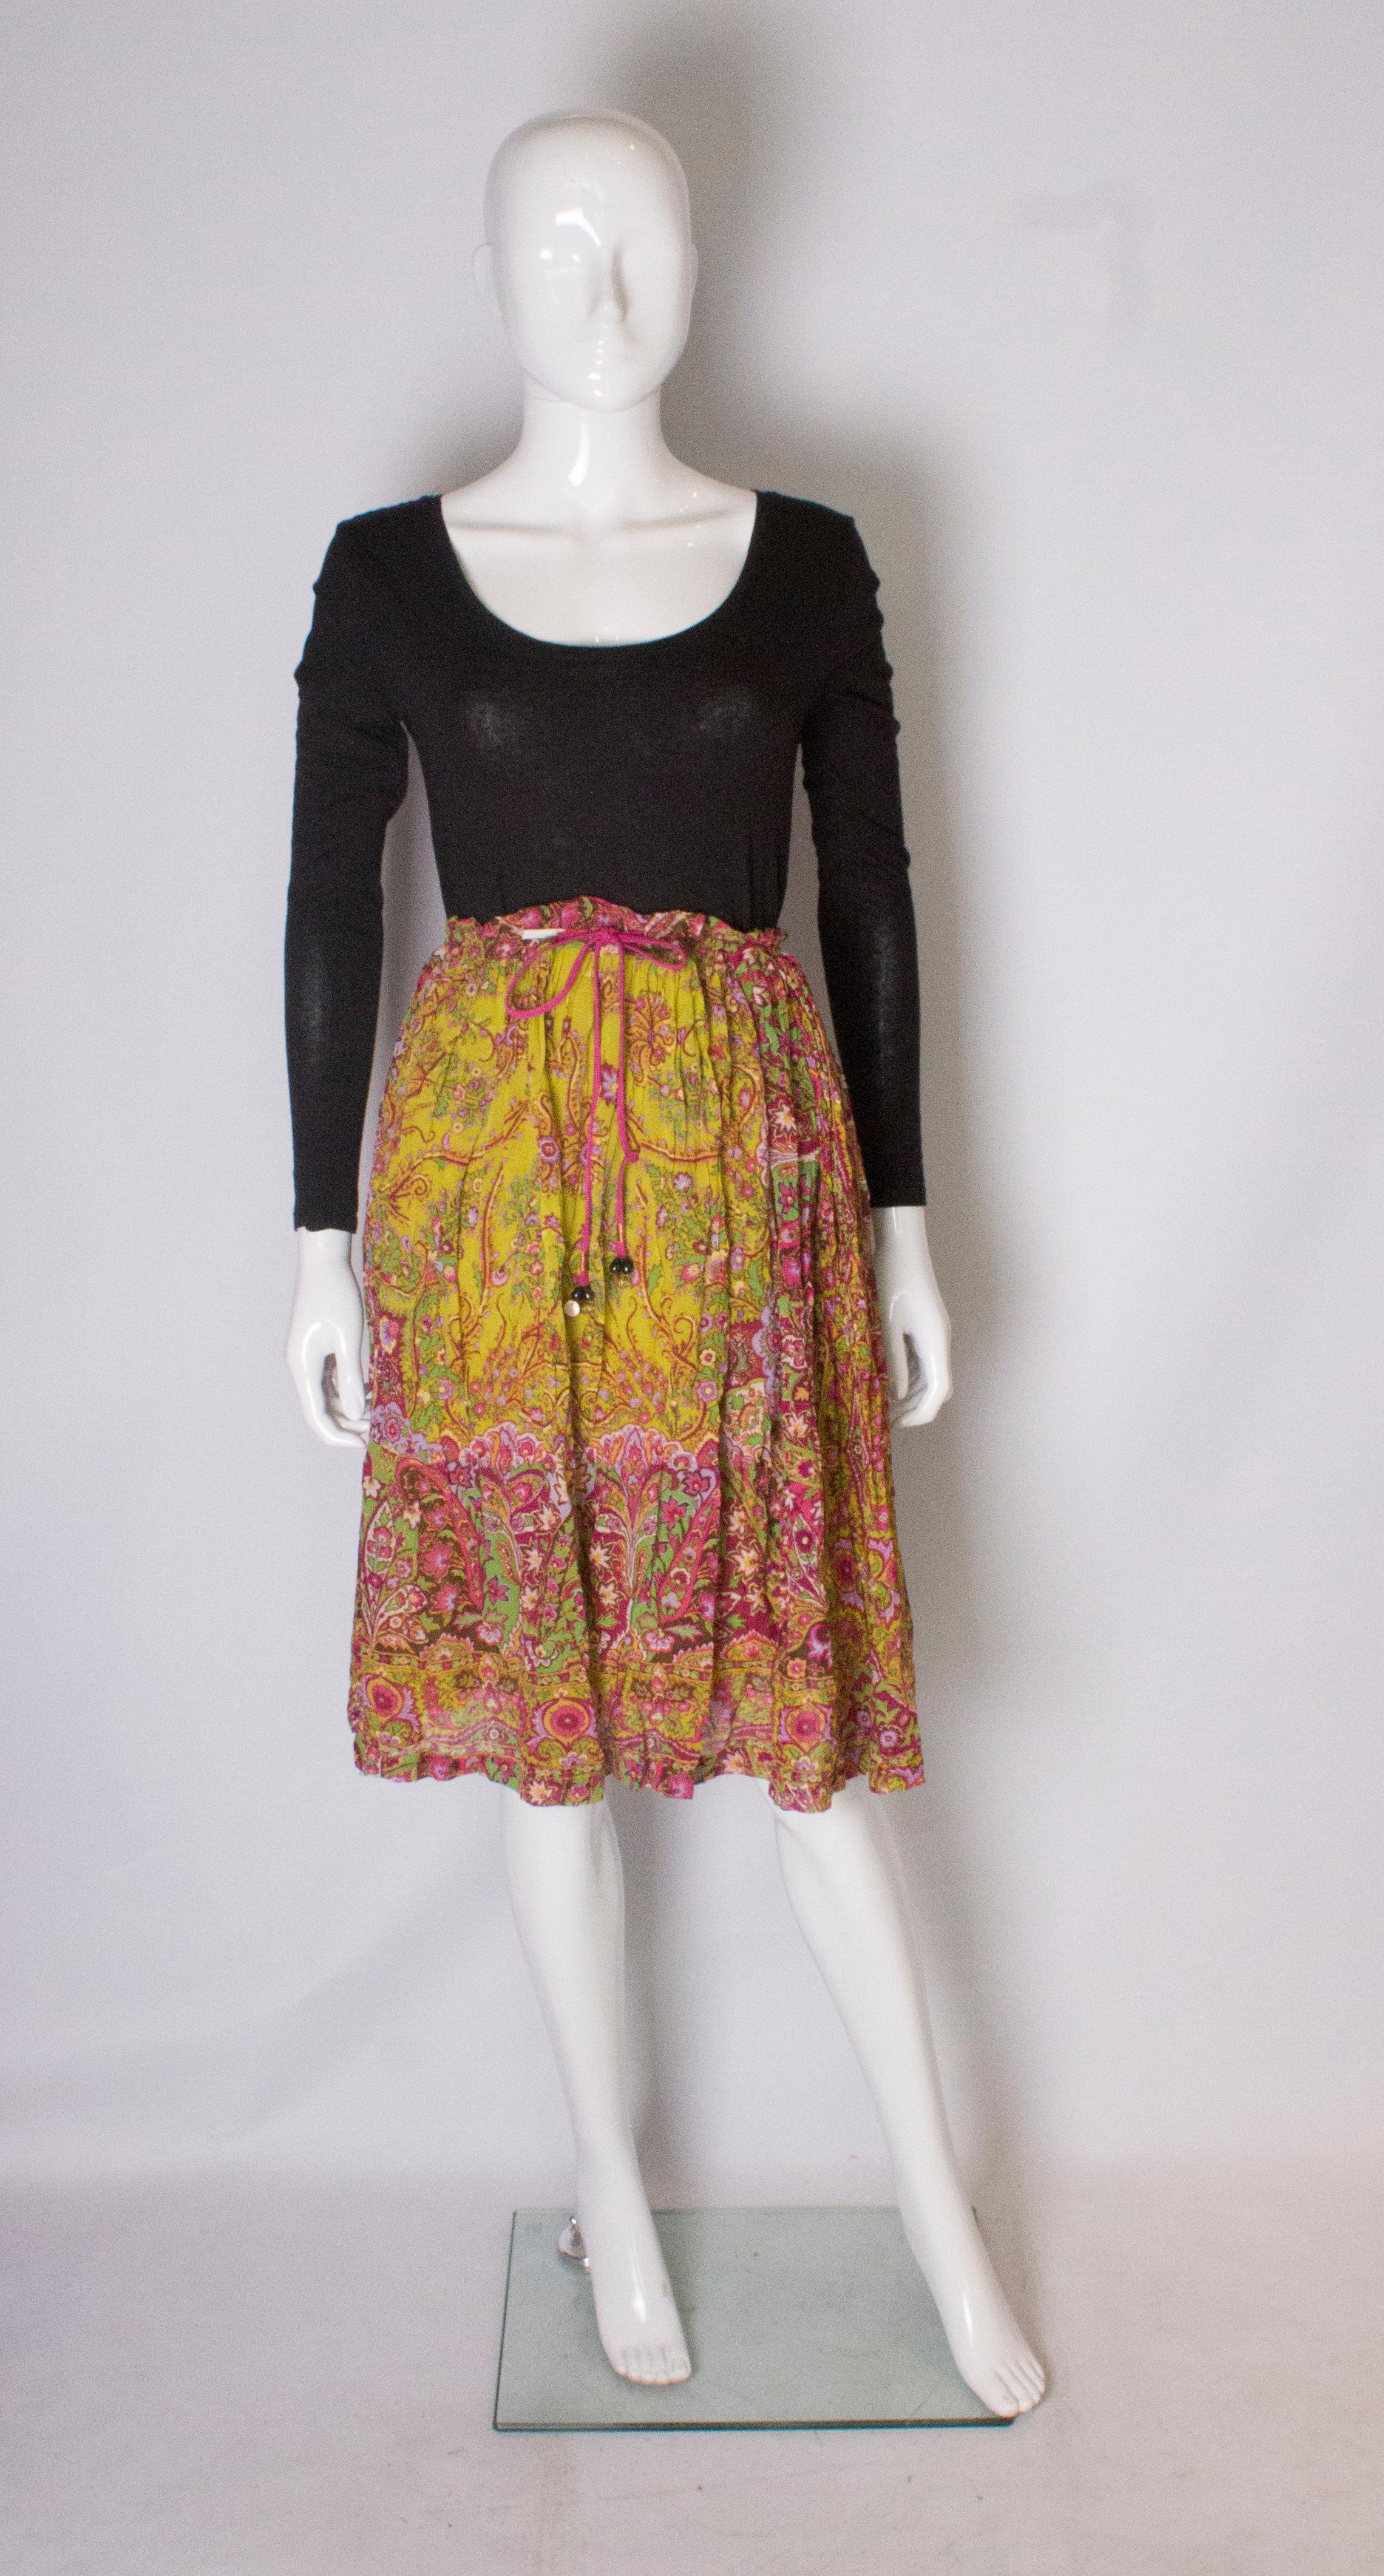 A pretty boho silk skirt by Etro Vintage. The skirt is in a pretty print with yellow, pinks,greens and browns,It has a drawstring waist with a pink silk tie and is fully lined in a mustard colour silk.